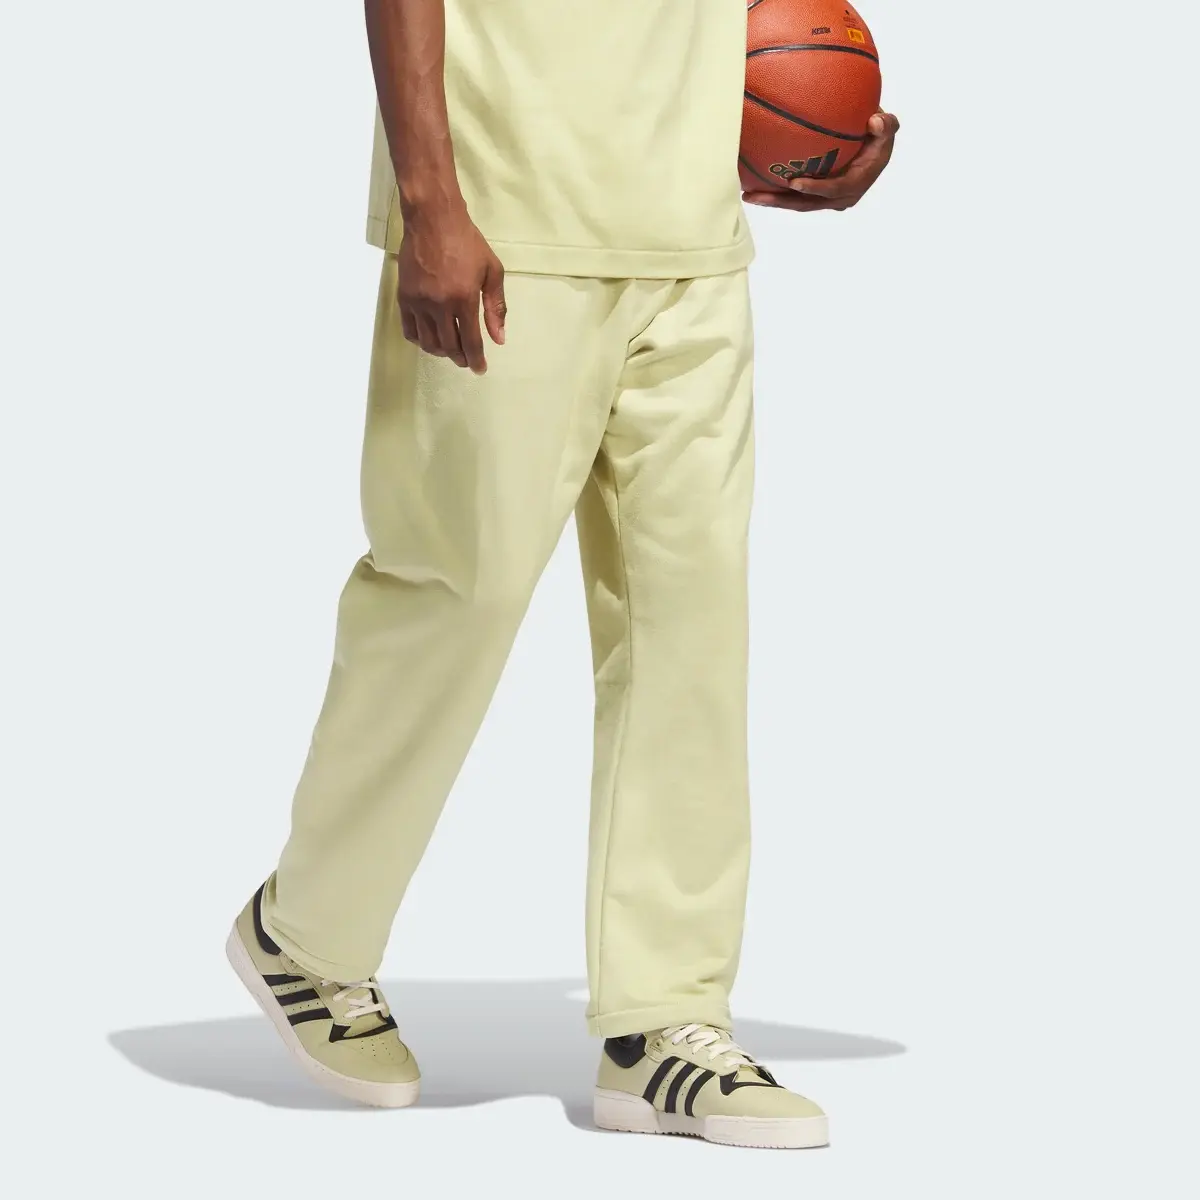 Adidas Basketball Sueded Pants. 3